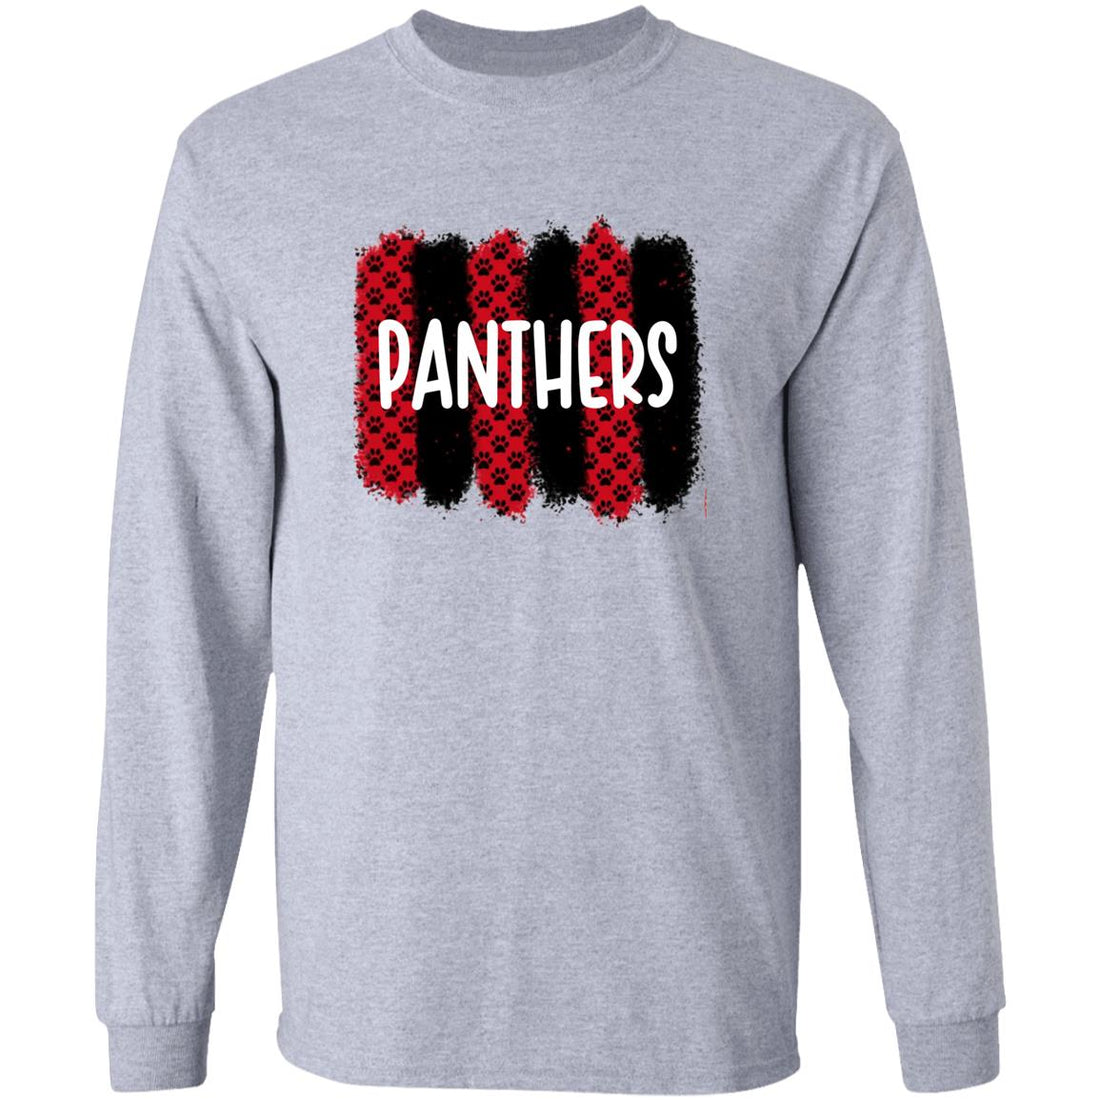 Panthers Paw Tracks Long Sleeve Ultra Cotton T-Shirt - T-Shirts - Positively Sassy - Panthers Paw Tracks Long Sleeve Ultra Cotton T-Shirt